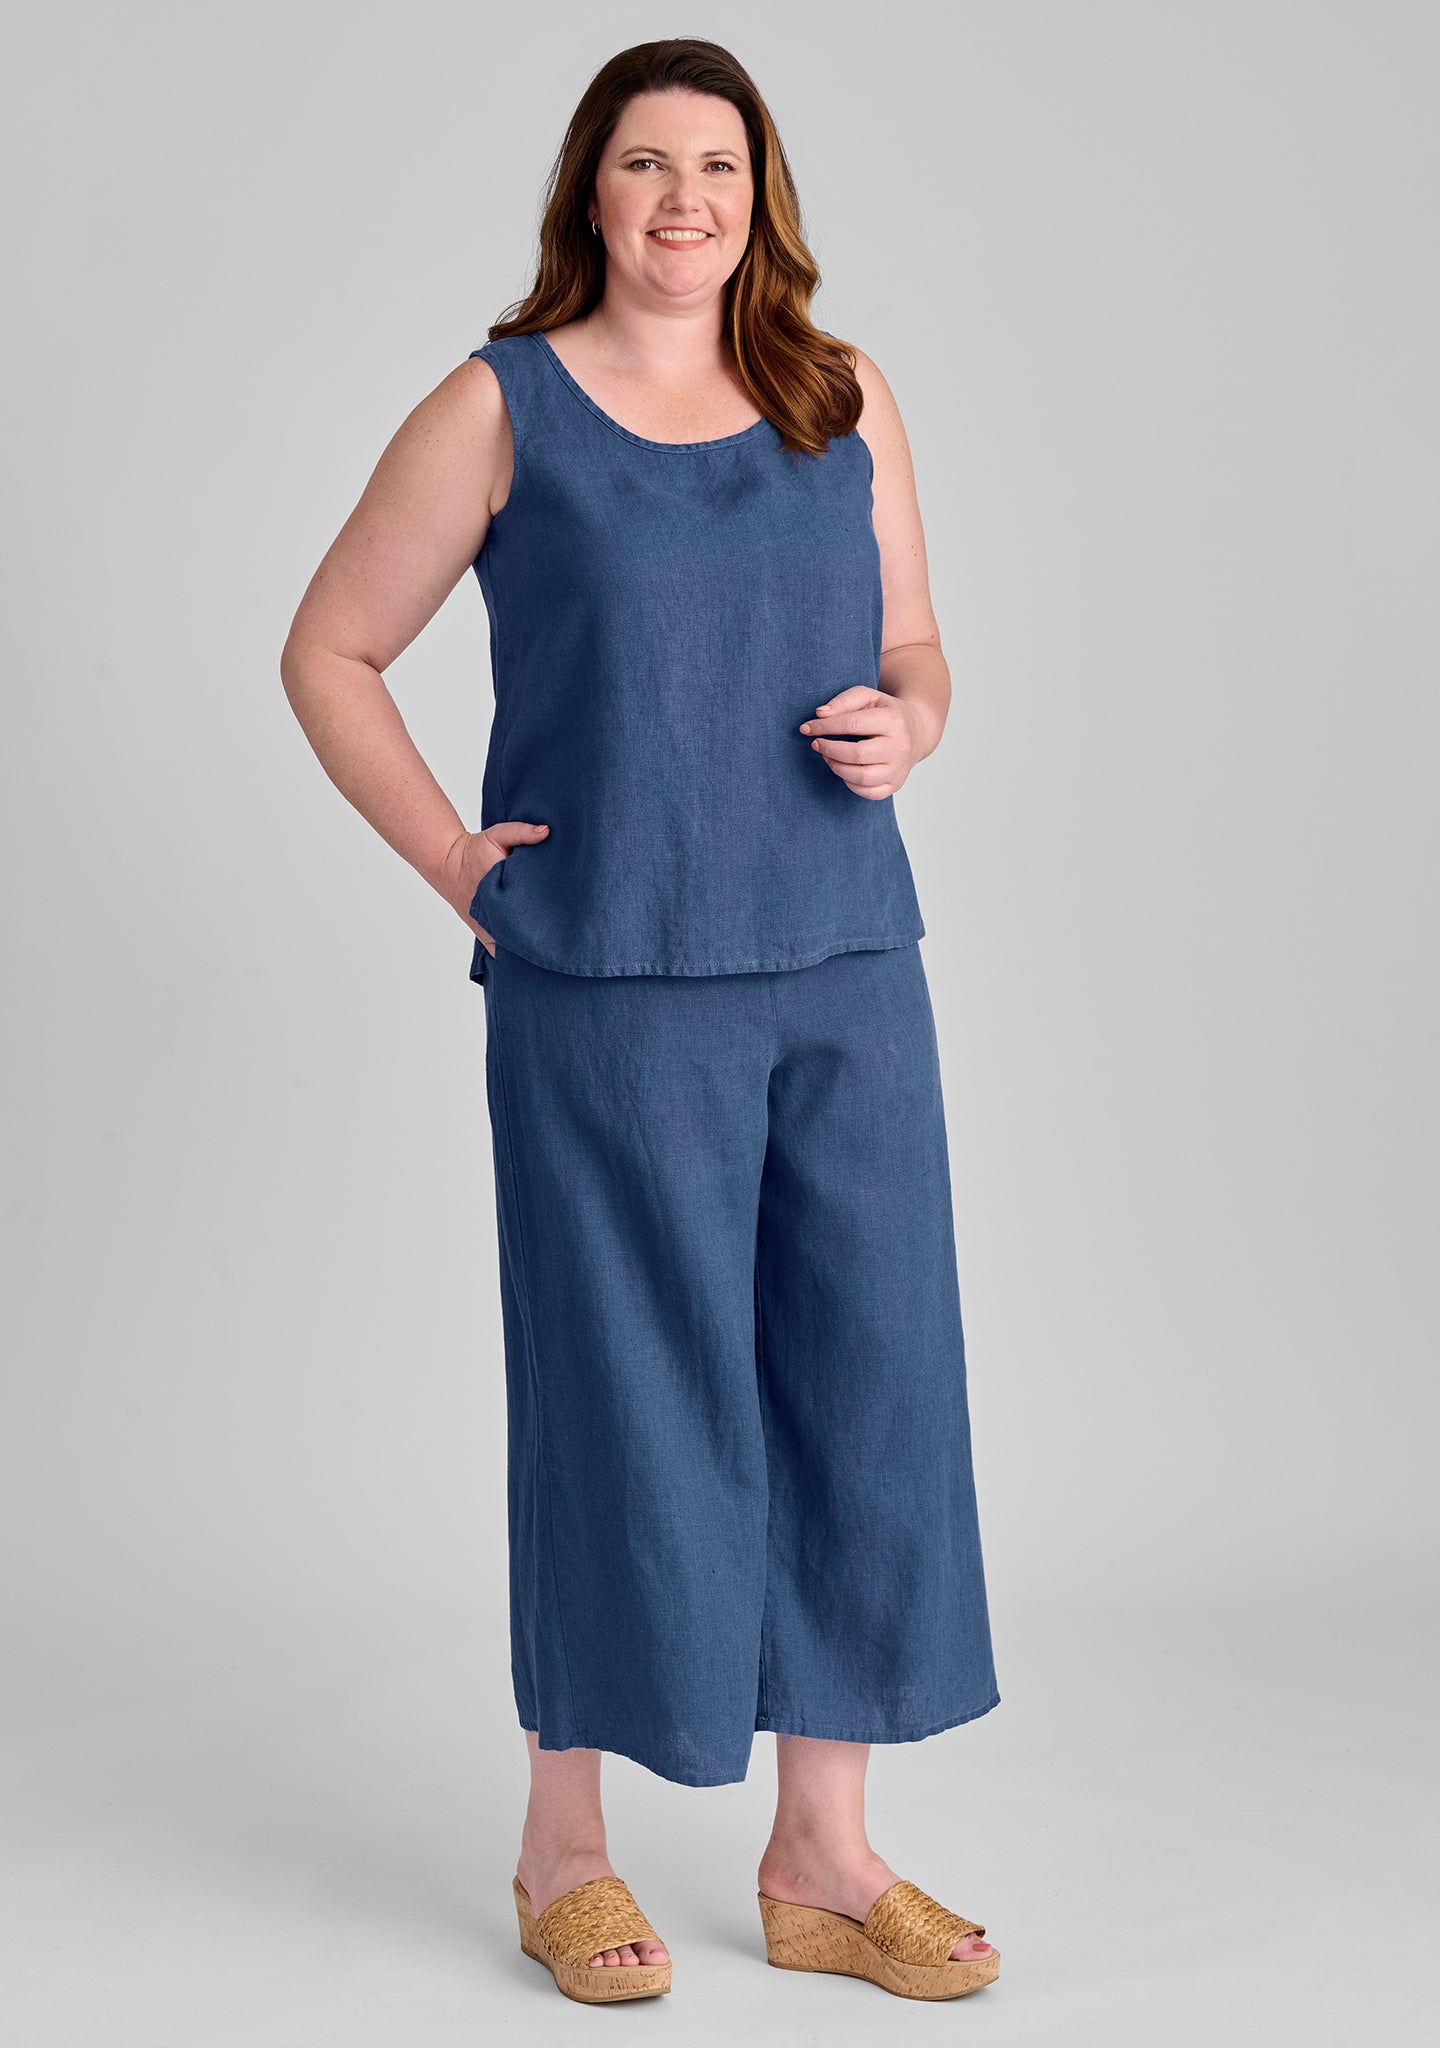 FLAX linen tank in blue with linen pants in blue